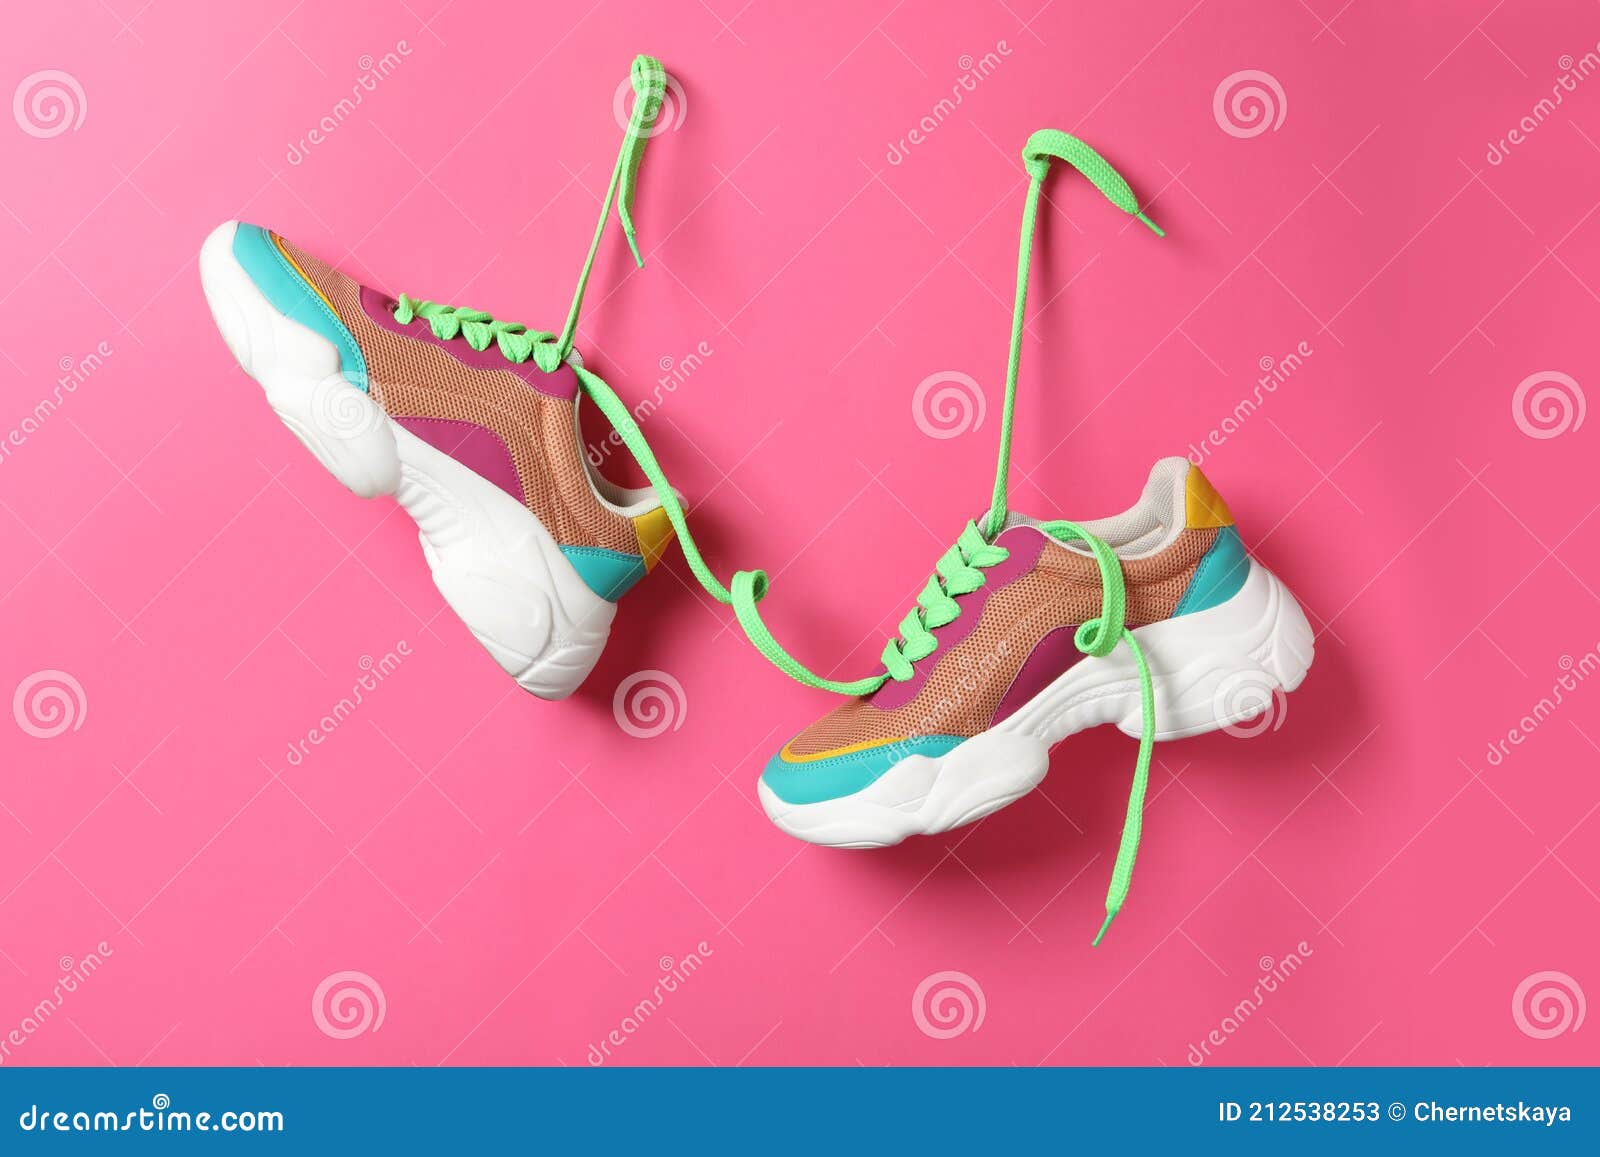 Stylish Sneakers with Green Shoe Laces Hanging on Pink Wall Stock Image ...